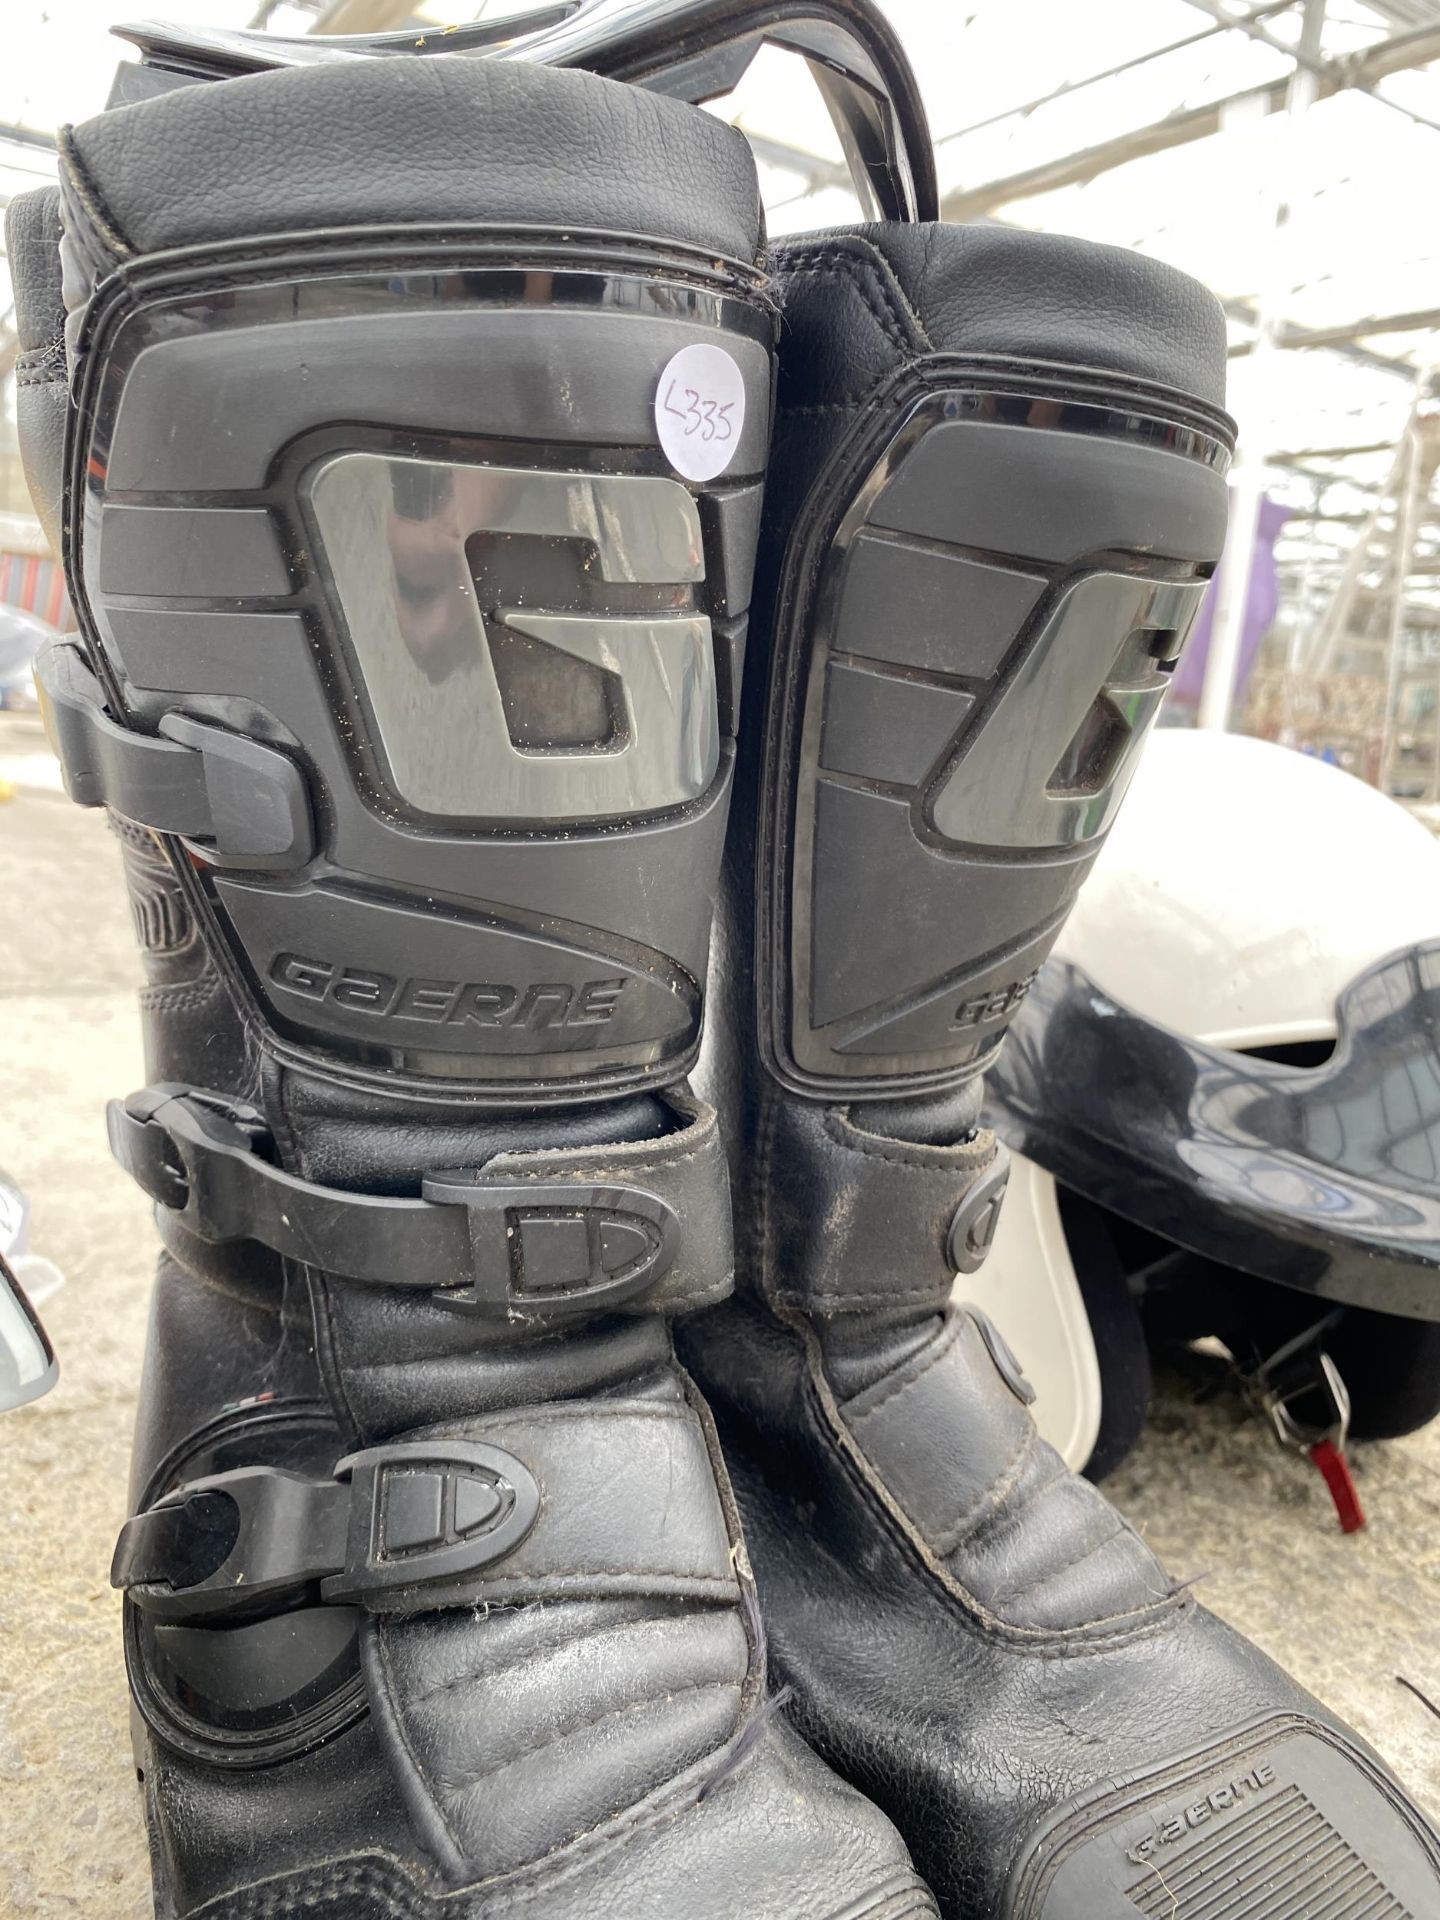 TWO MOTORBIKE HELMETS AND A PAIR OF BOOTS - Image 4 of 5